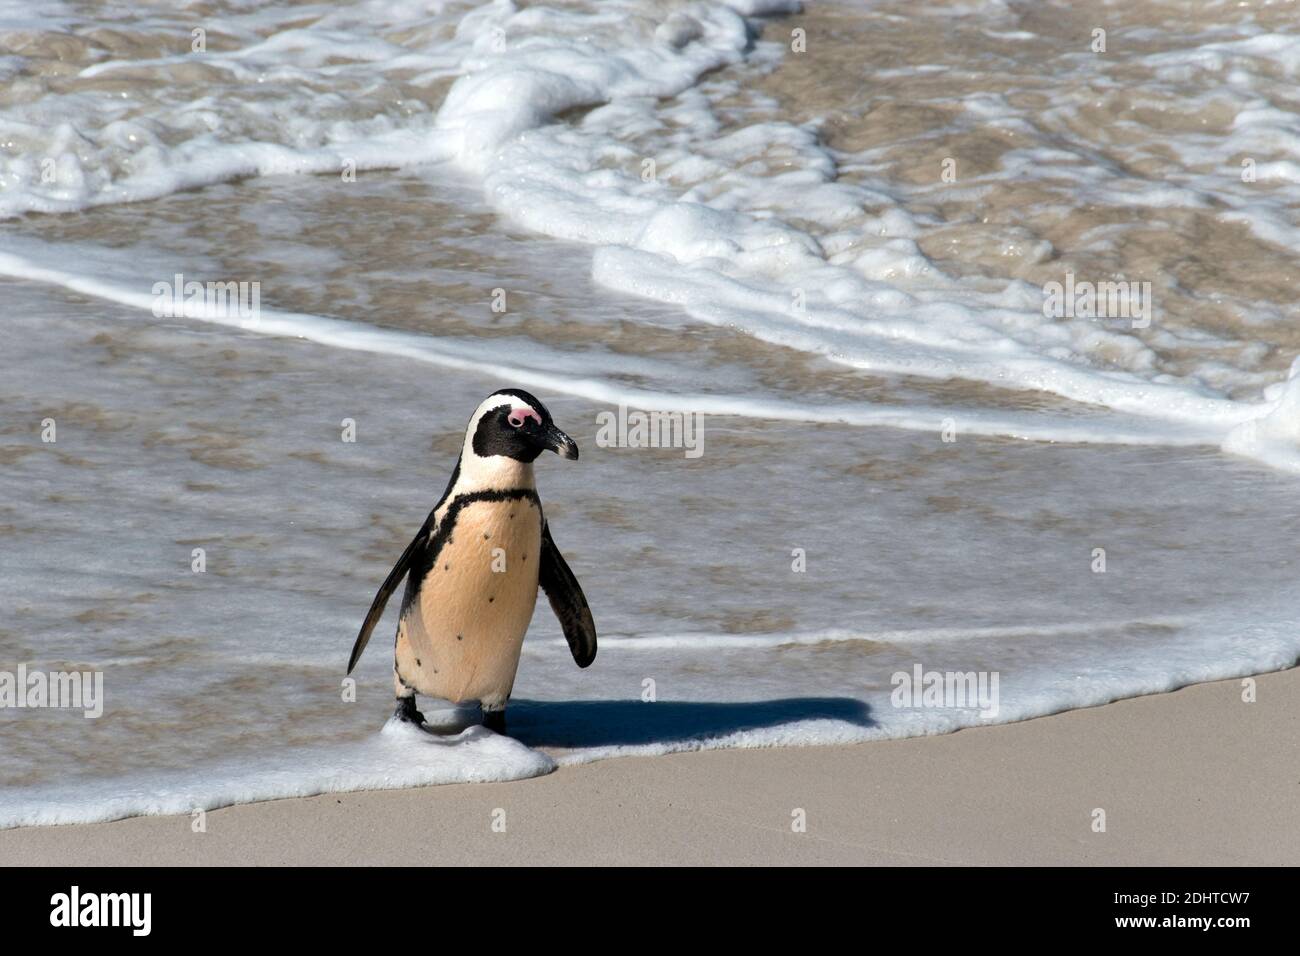 An African penguin walks on Boulders Beach (part of the Table Mountain National Park) near Simon's Town, South Africa. Stock Photo